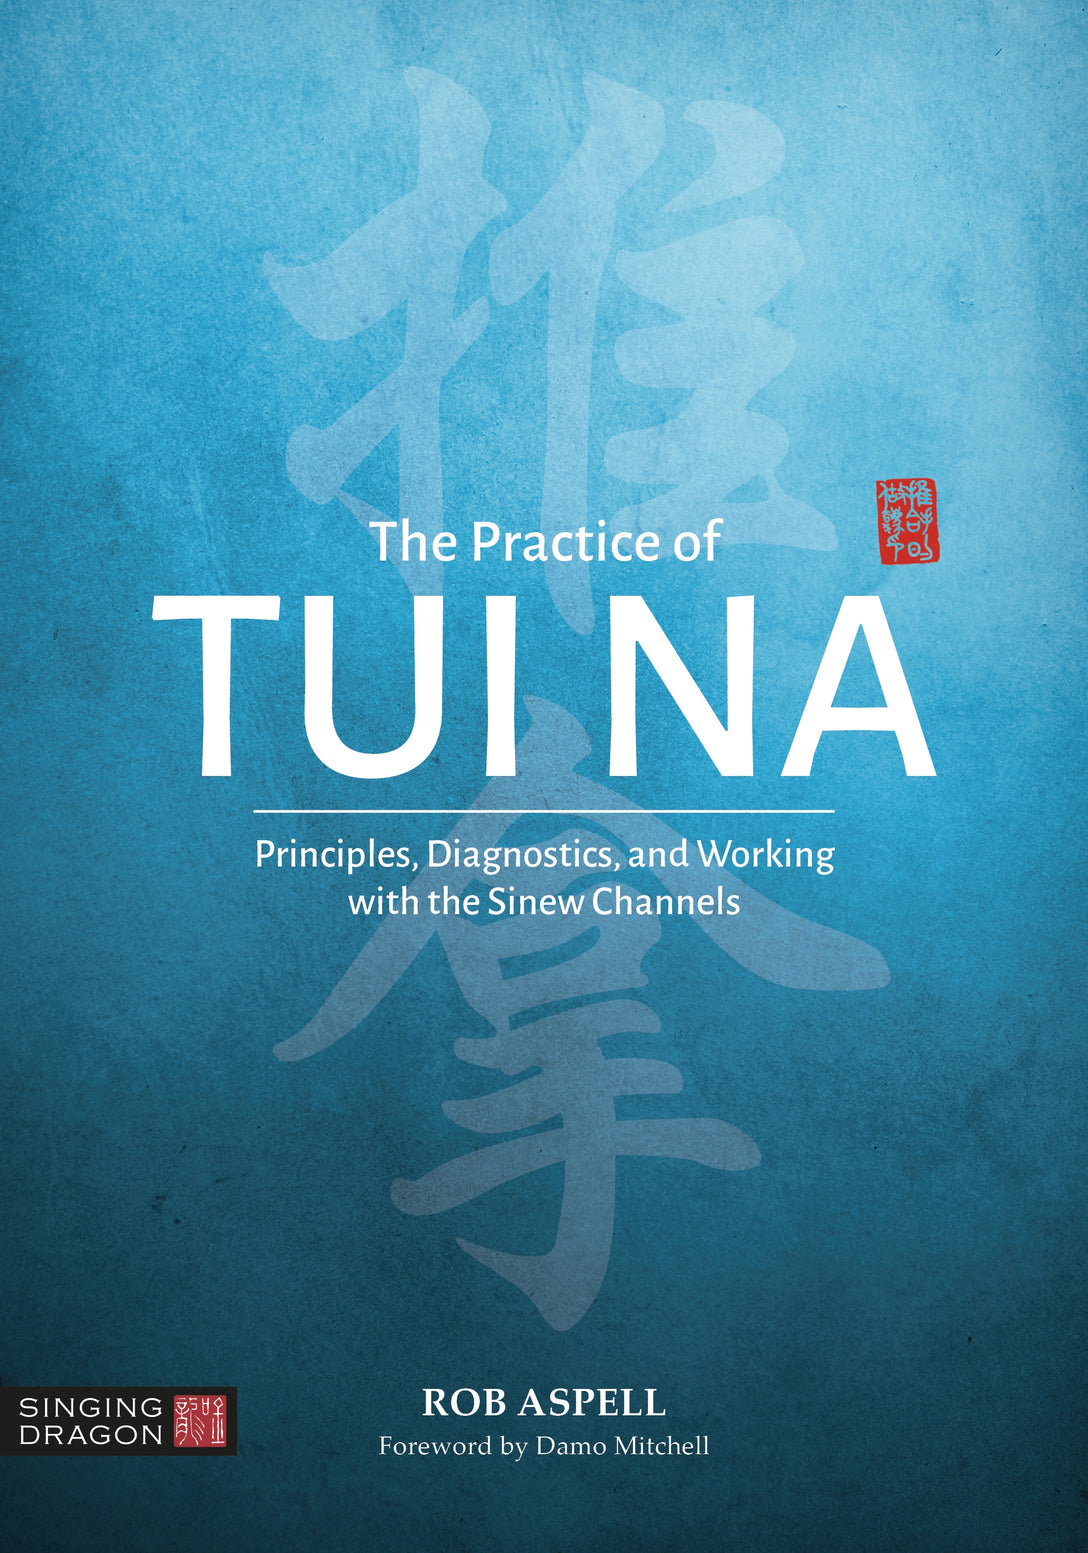 The Practice of Tui Na by Robert Aspell